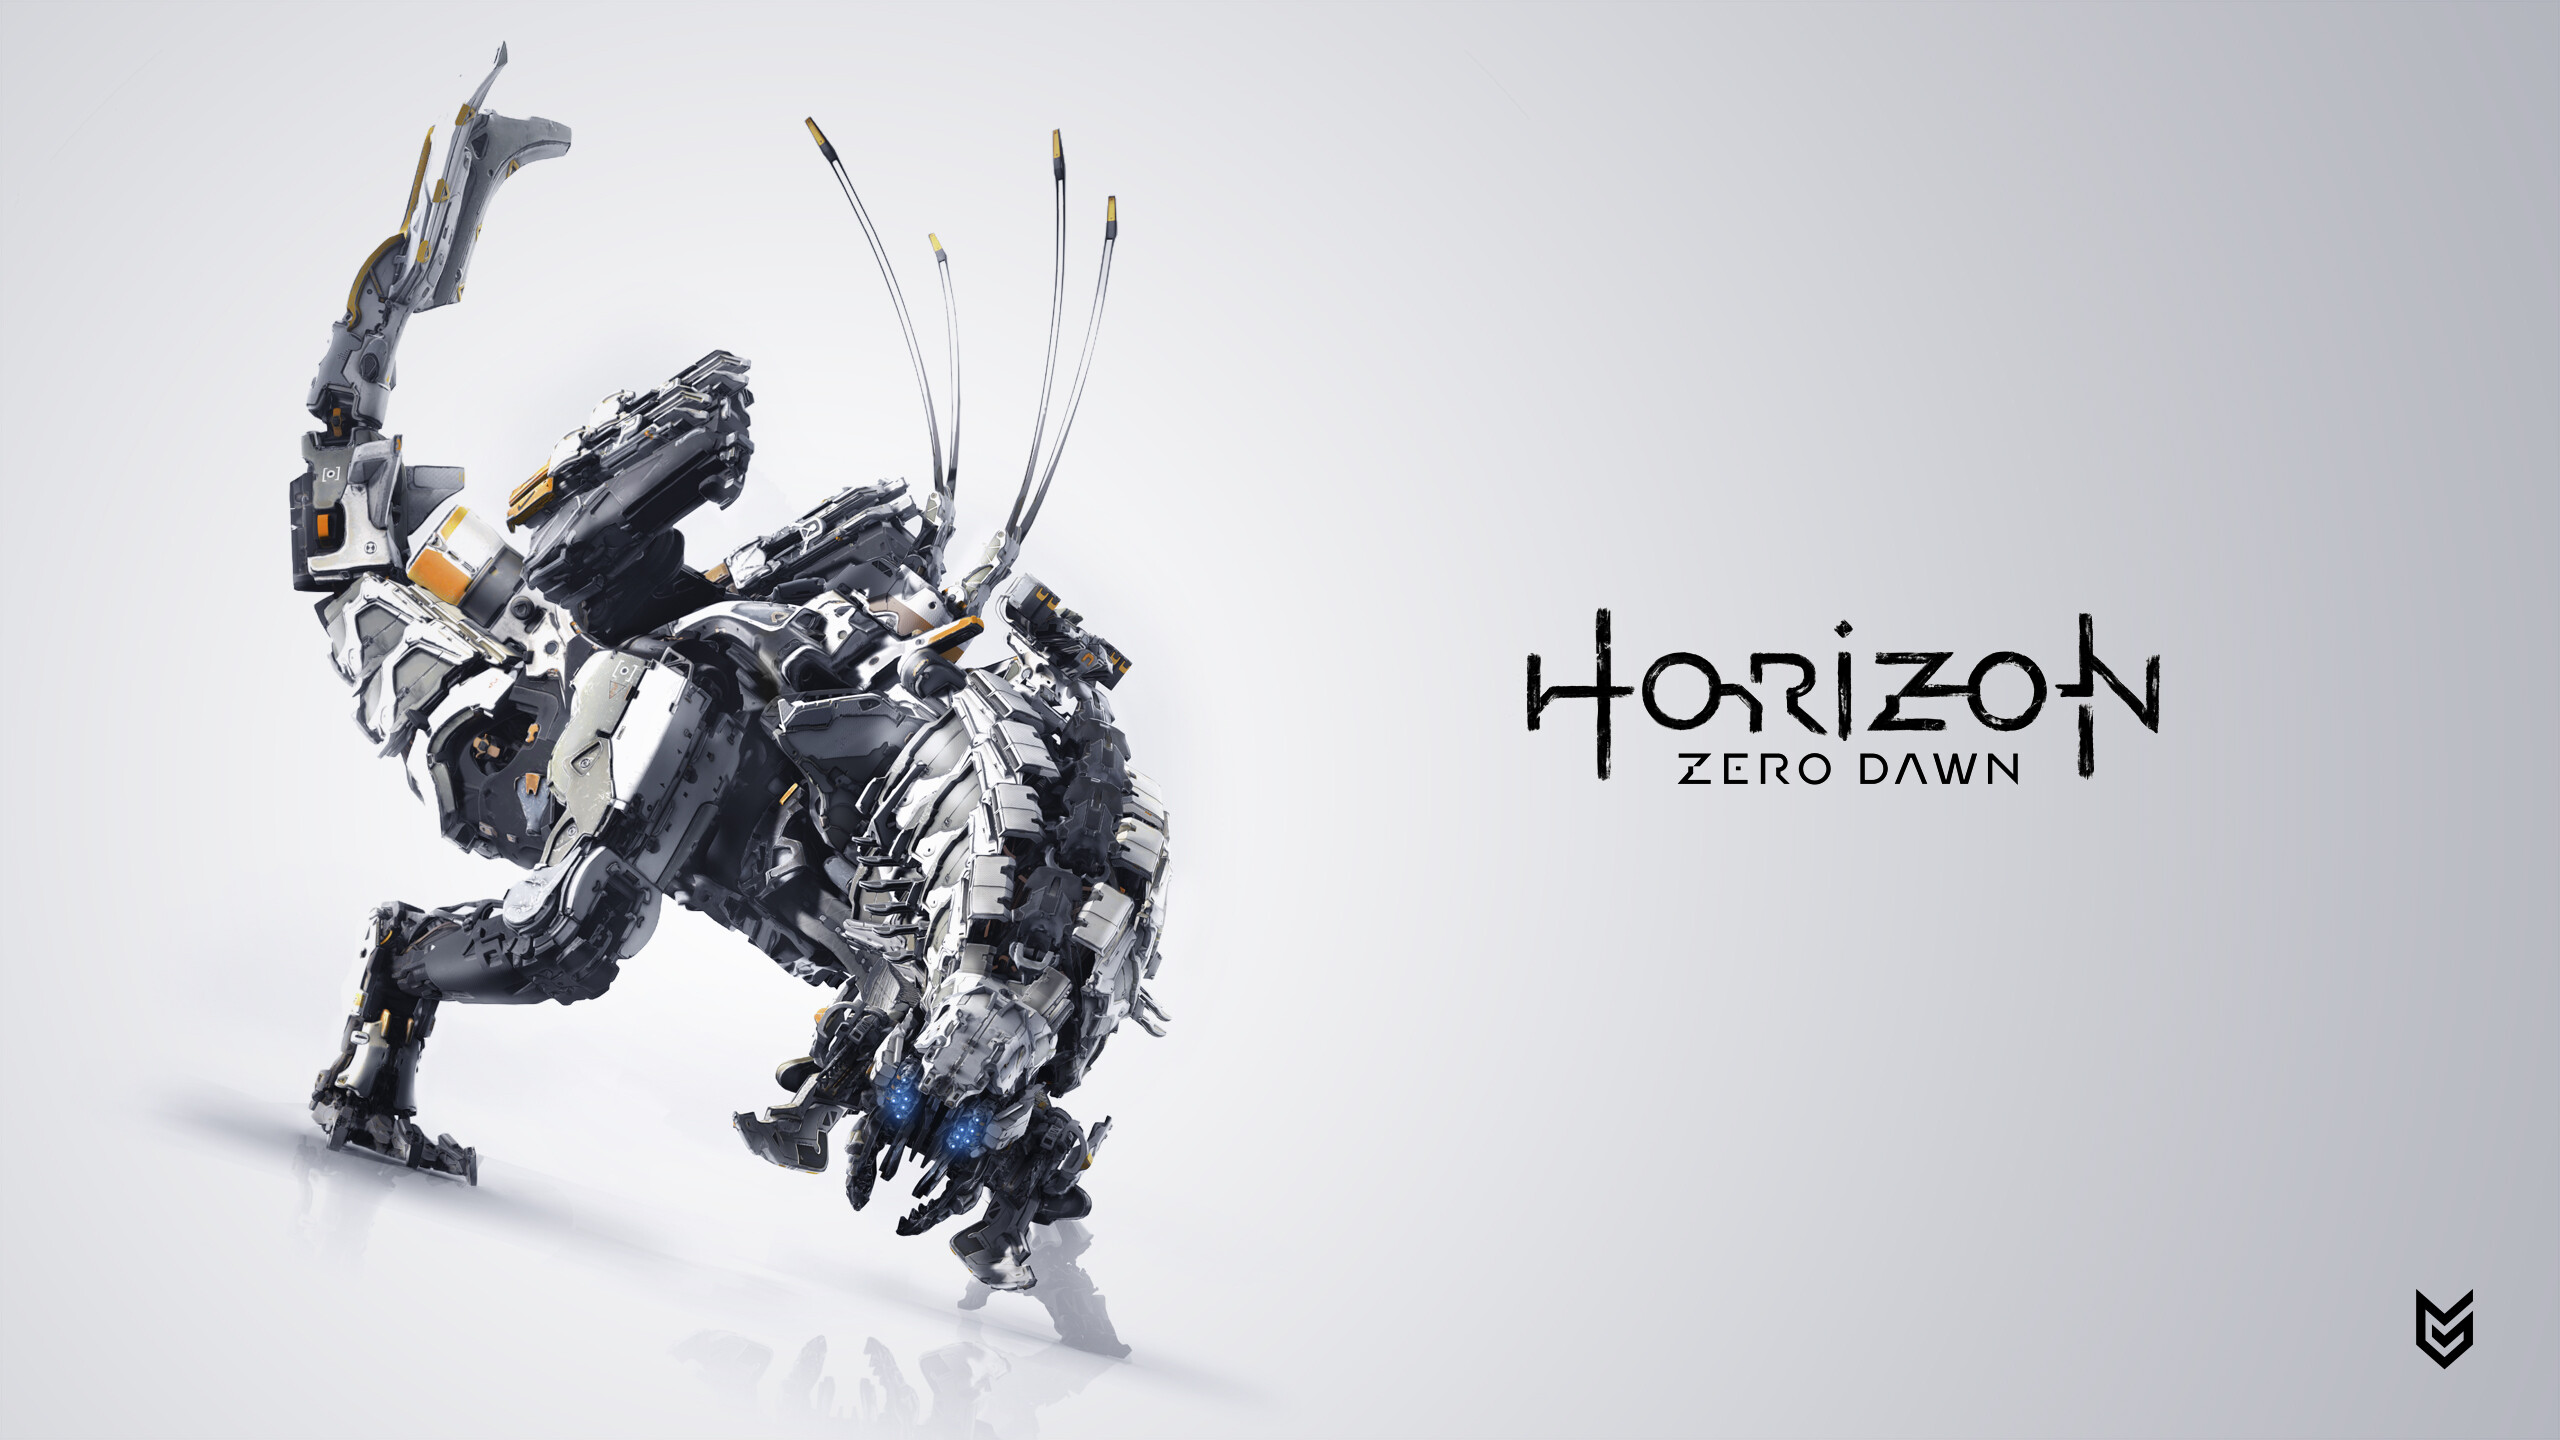 Horizon Zero Dawn: The game won numerous awards, making it one of the best-selling PlayStation 4 games, PS4. 2560x1440 HD Wallpaper.